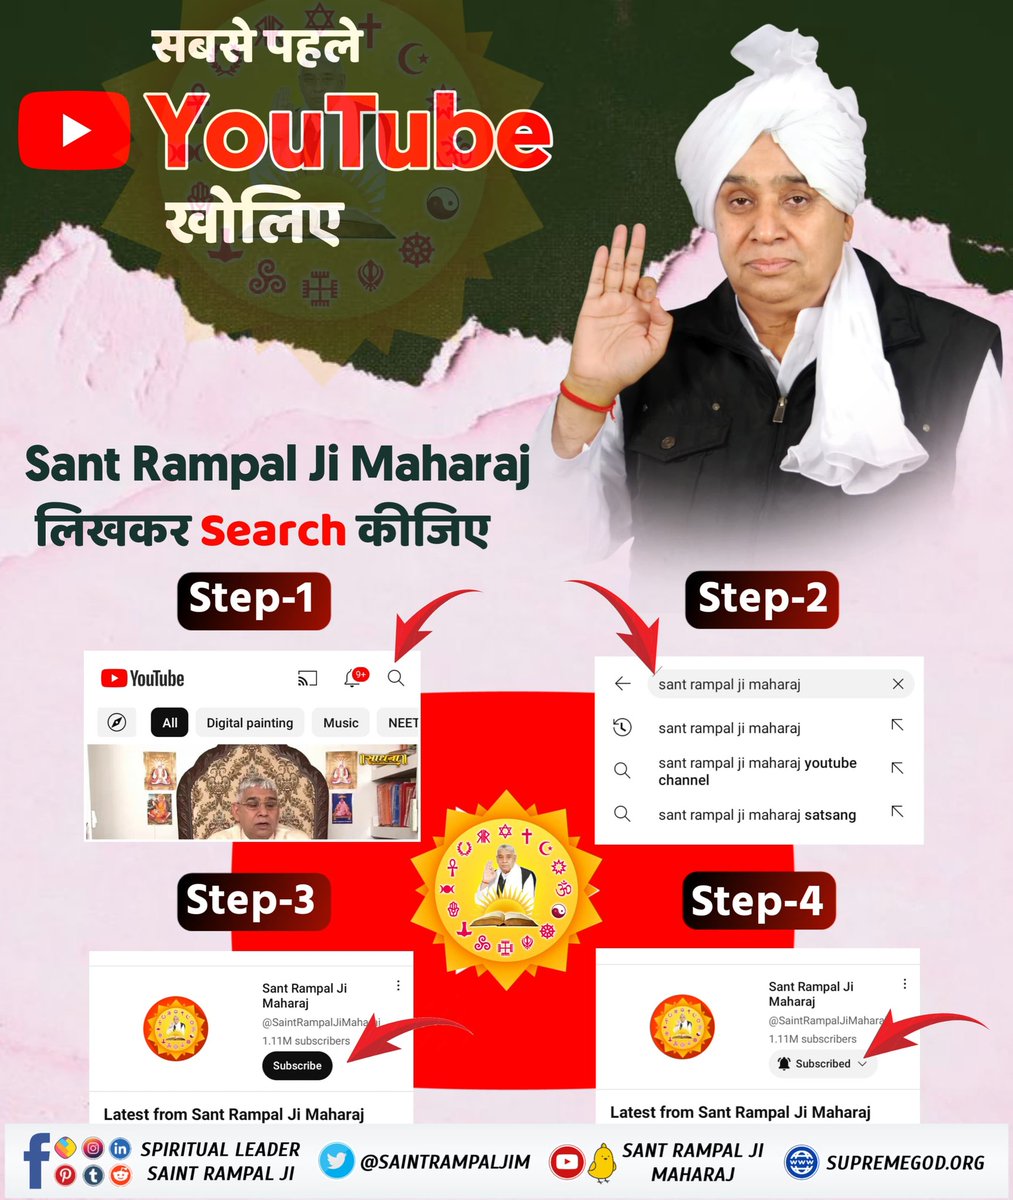 One should always do righteous deeds. One should never do injustice. Those who commit injustice go to hell in the world of Yamraj.

#जगत_उद्धारक_संत_रामपालजी
SUBSCRIBE
'SA TRUE STORY' Youtube Channel